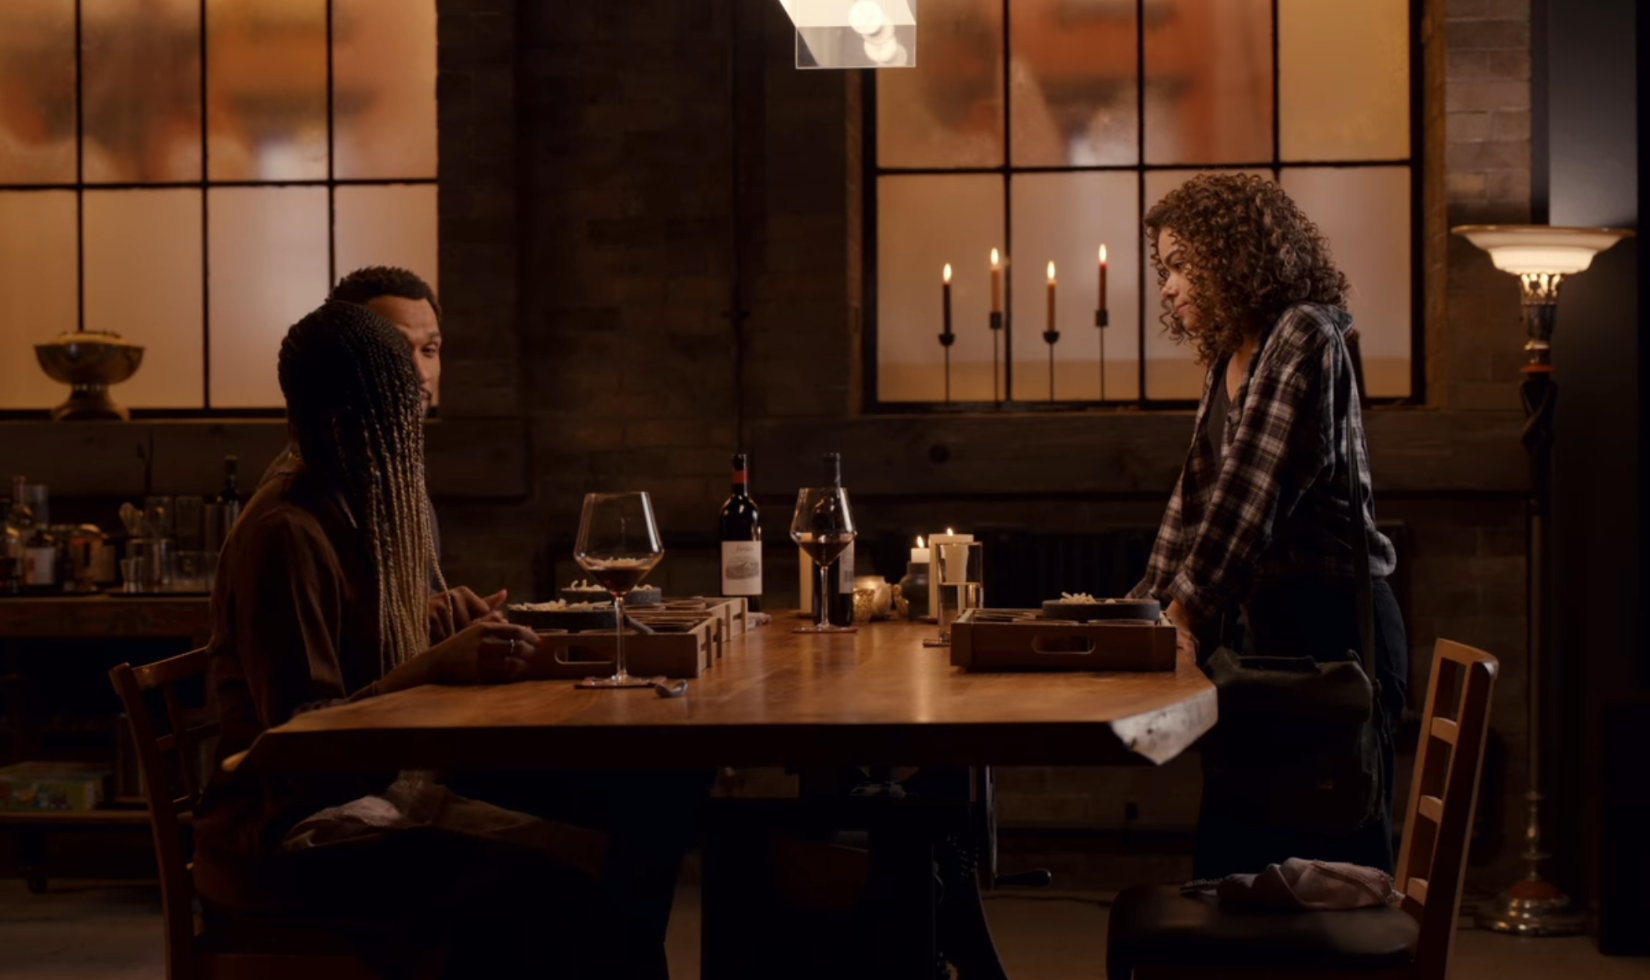 Screenshot from the TV series Ginny & Georgia, showing group dining at a restaurant with a bottle of Jordan Cabernet Sauvignon on the table